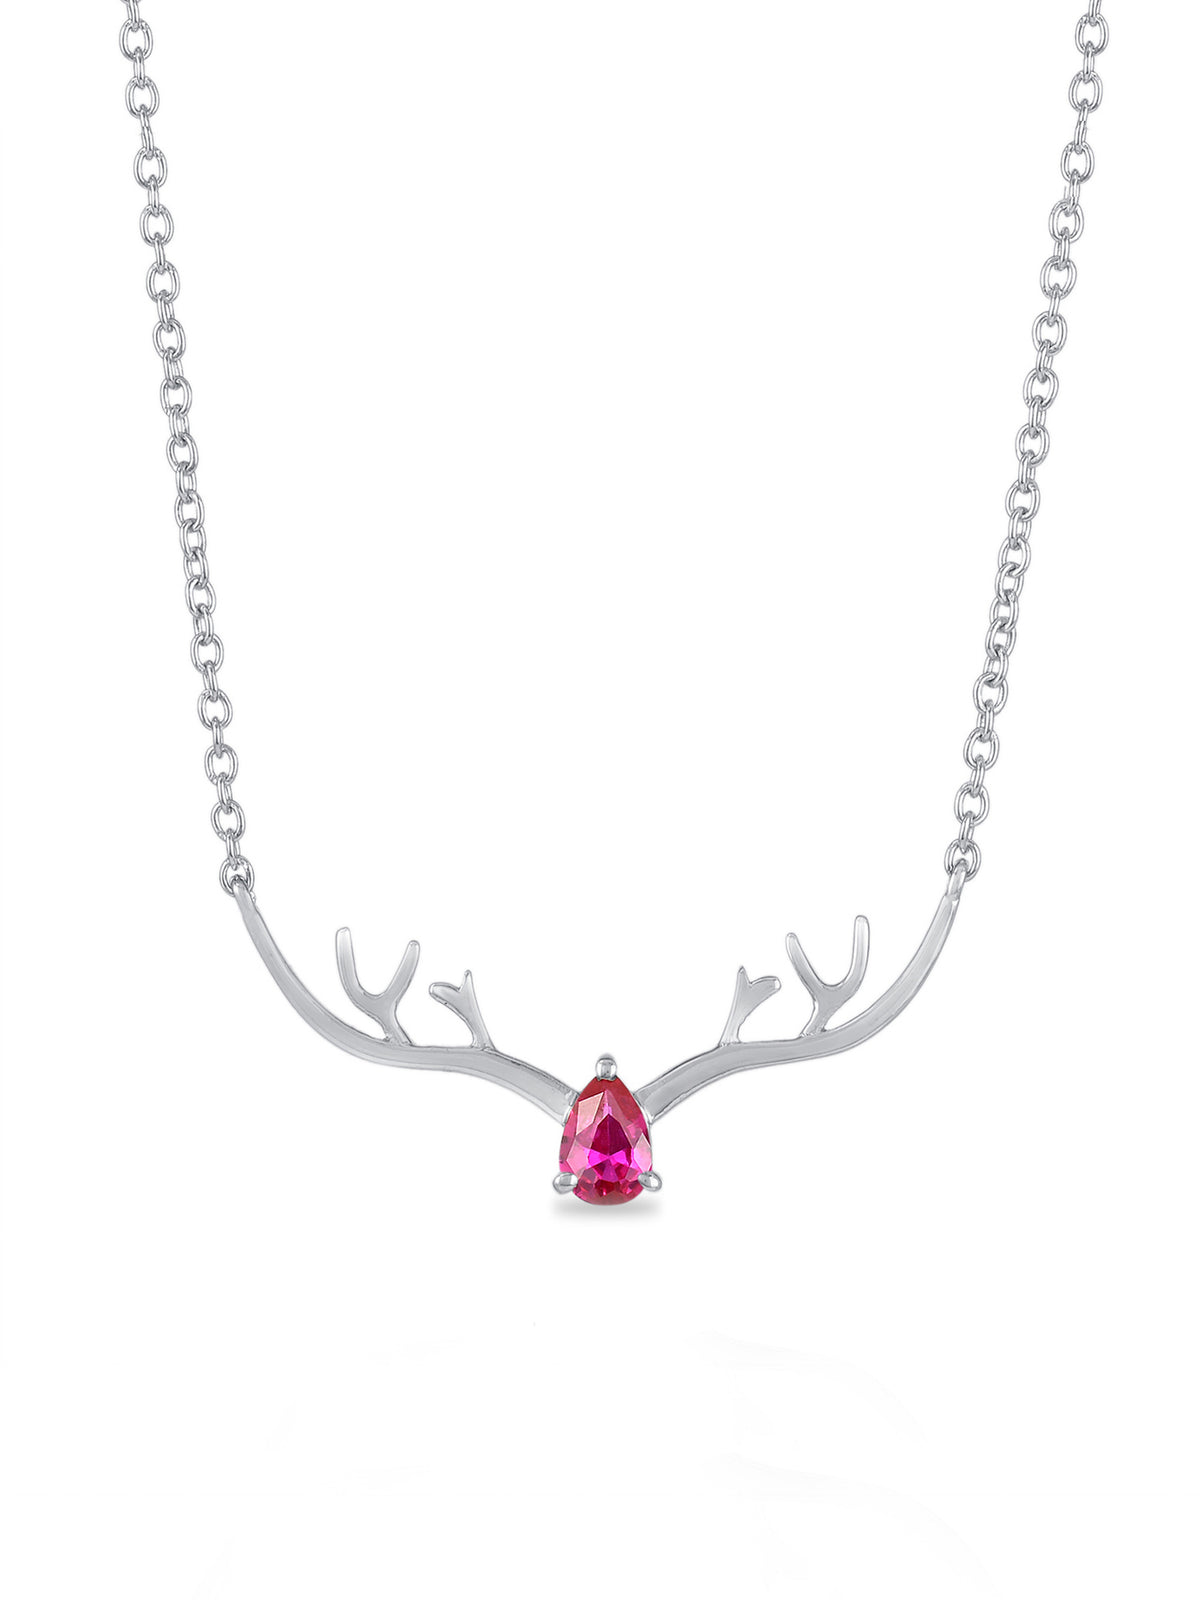 Ornate Jewels Ruby Deer Necklace For Women